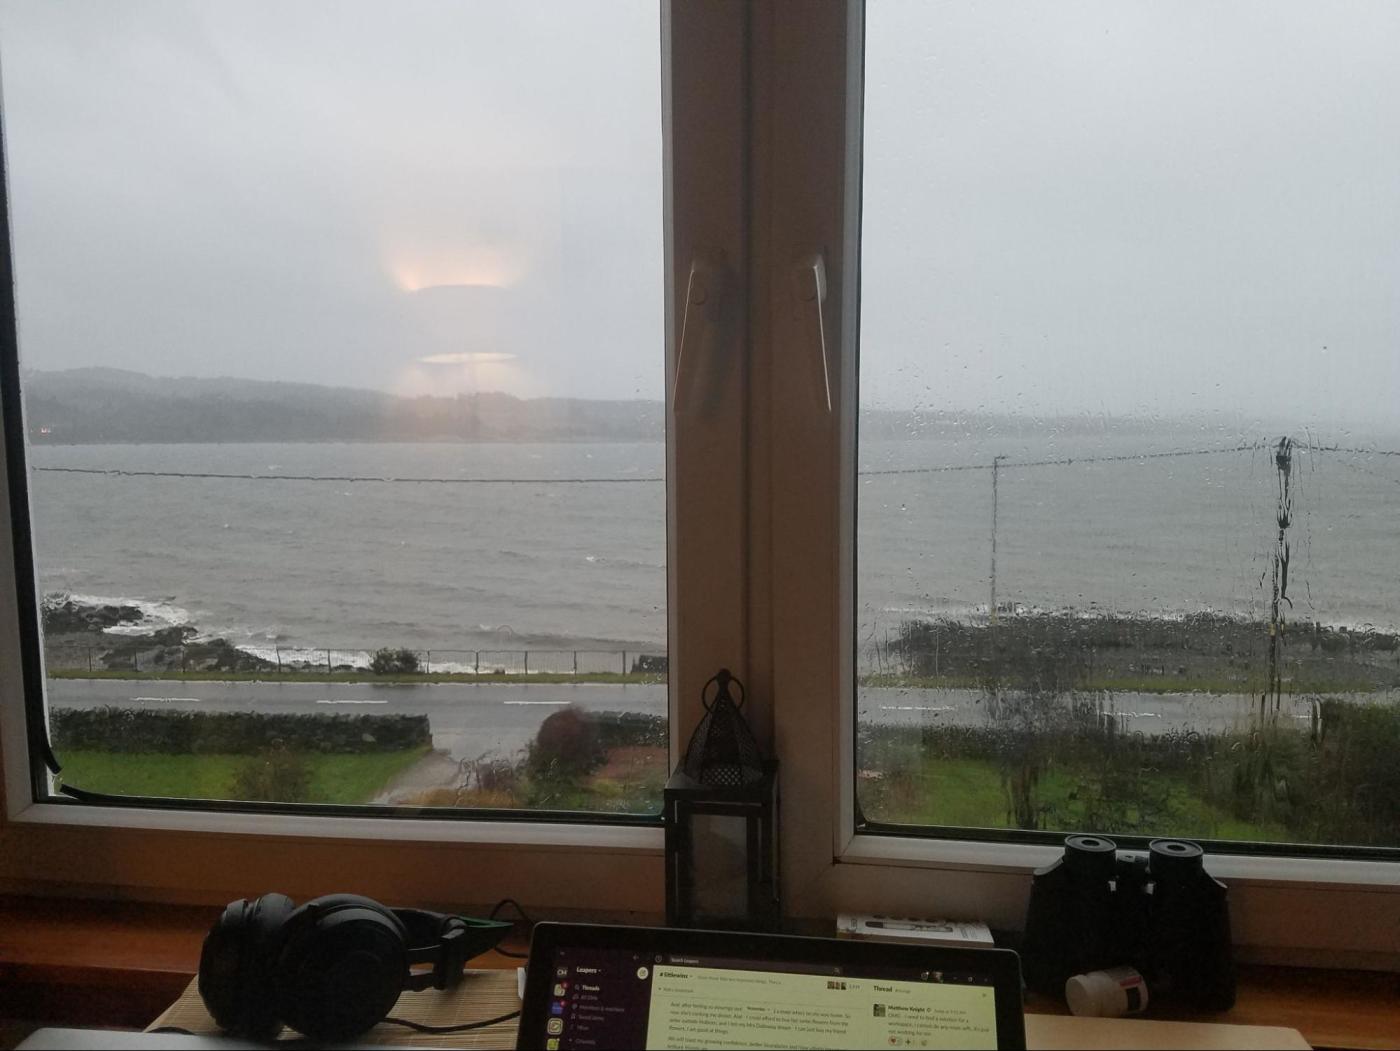 A picture of Leanna's computer, with Slack open, looking out over water